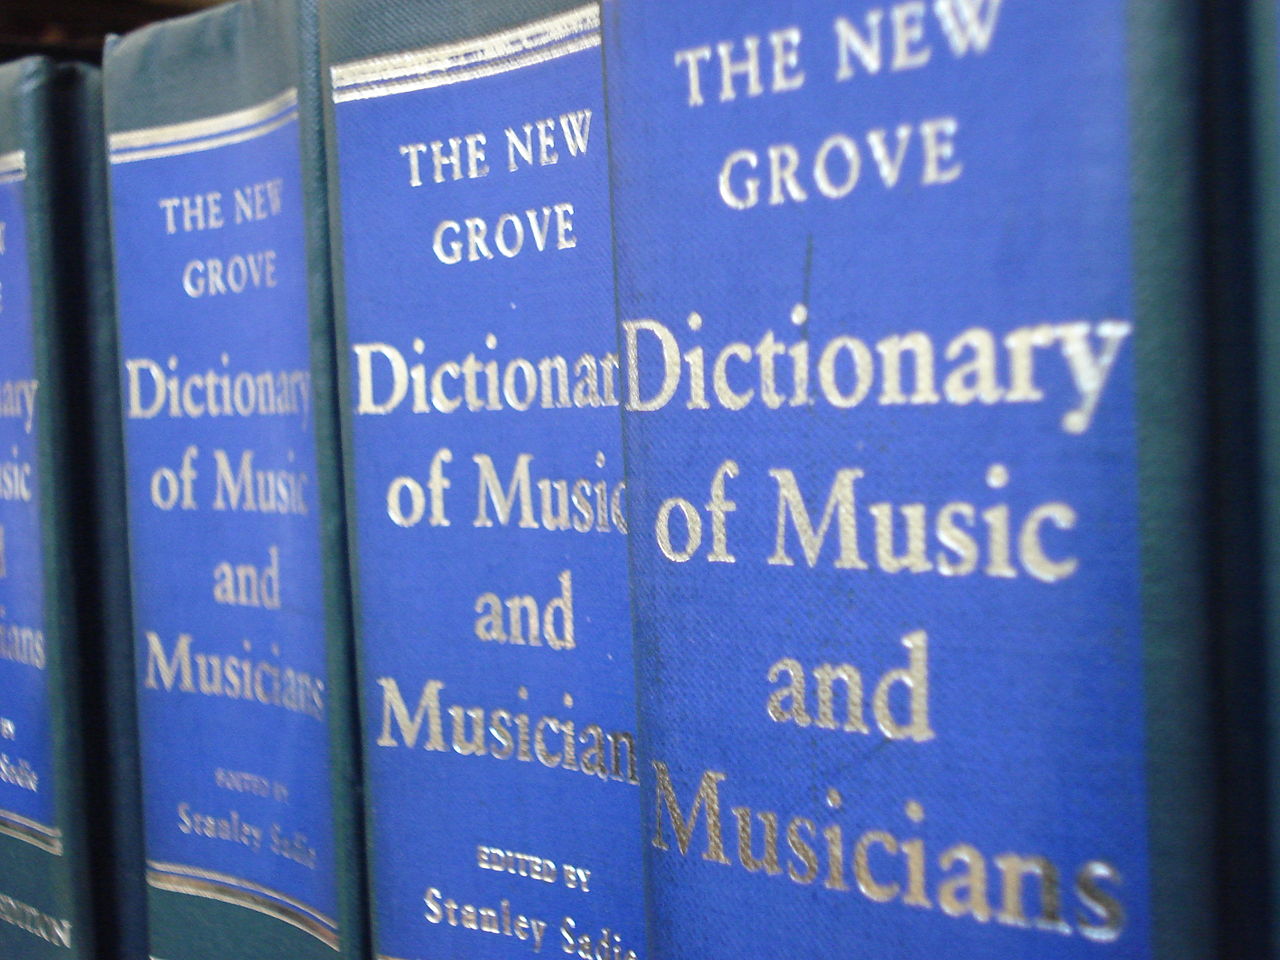  The New Grove dictionary of music and musicians (Fuente: commons.wikimedia.org)